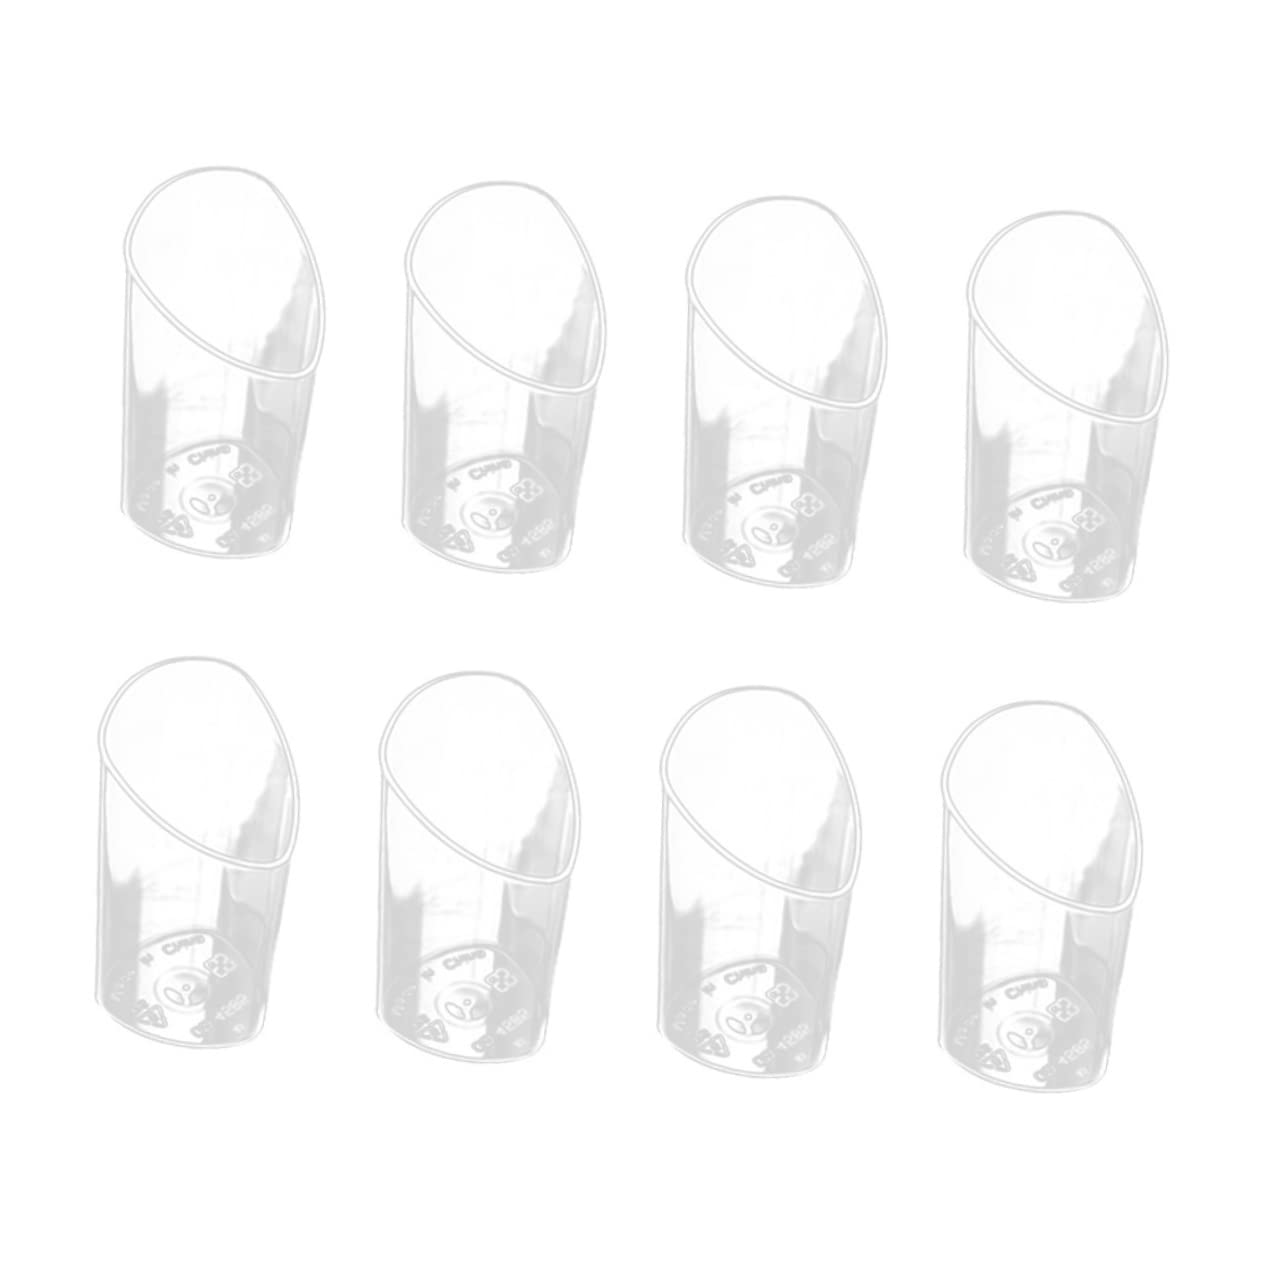 MUSISALY 10pcs Desert Cups Mini Glass Dessert Cup Small Bowl Parfait Mousse Cup Wood Bran Pudding Cup Plastic Parfait Cup Transparent Dessert Cup Cheese Snack Cup Ice Cream Cups